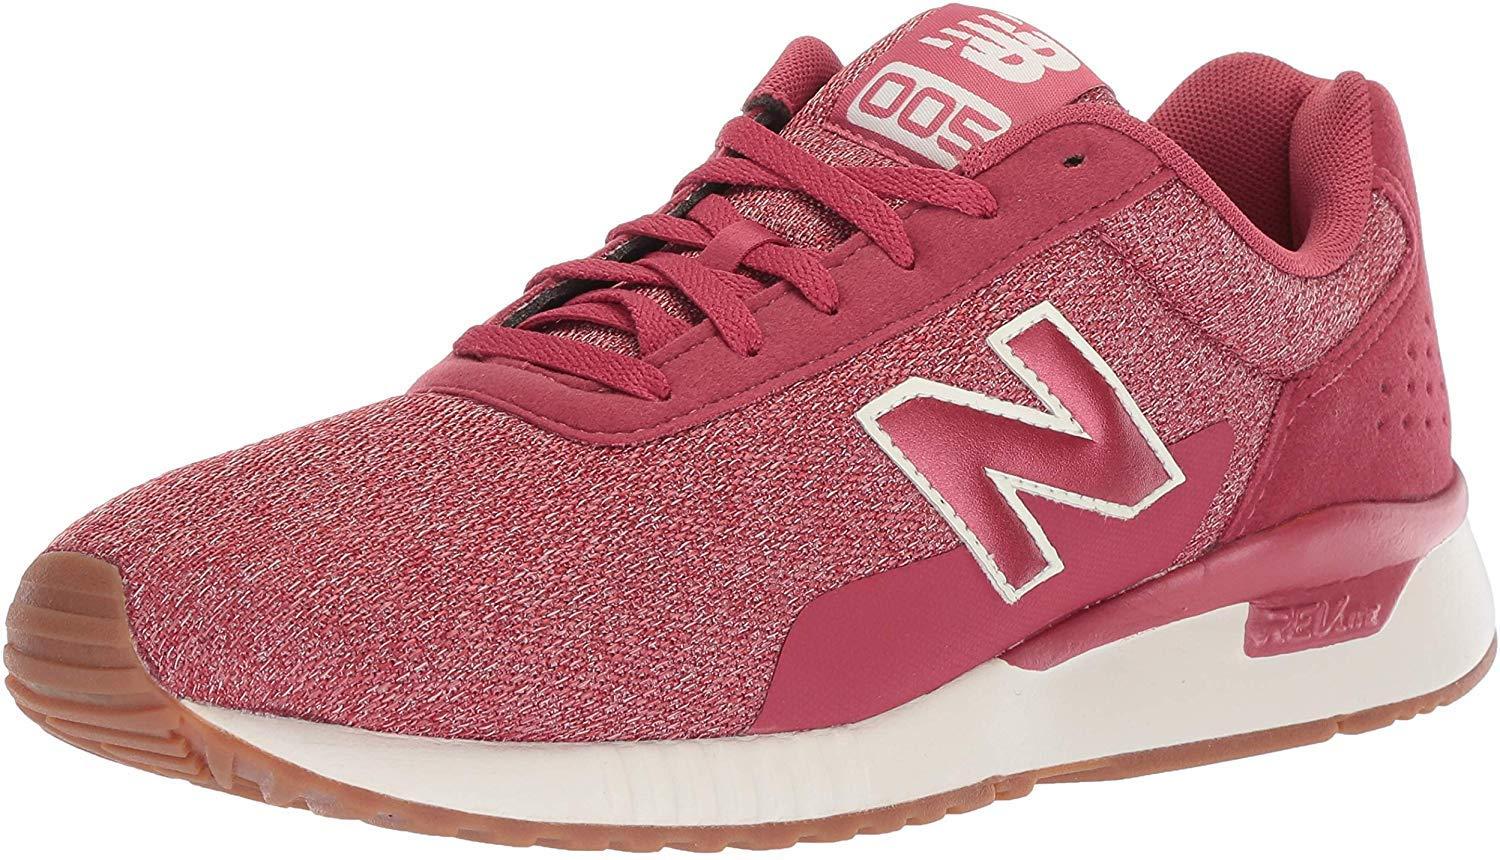 New Balance 005 V2 Sneaker in Red - Lyst